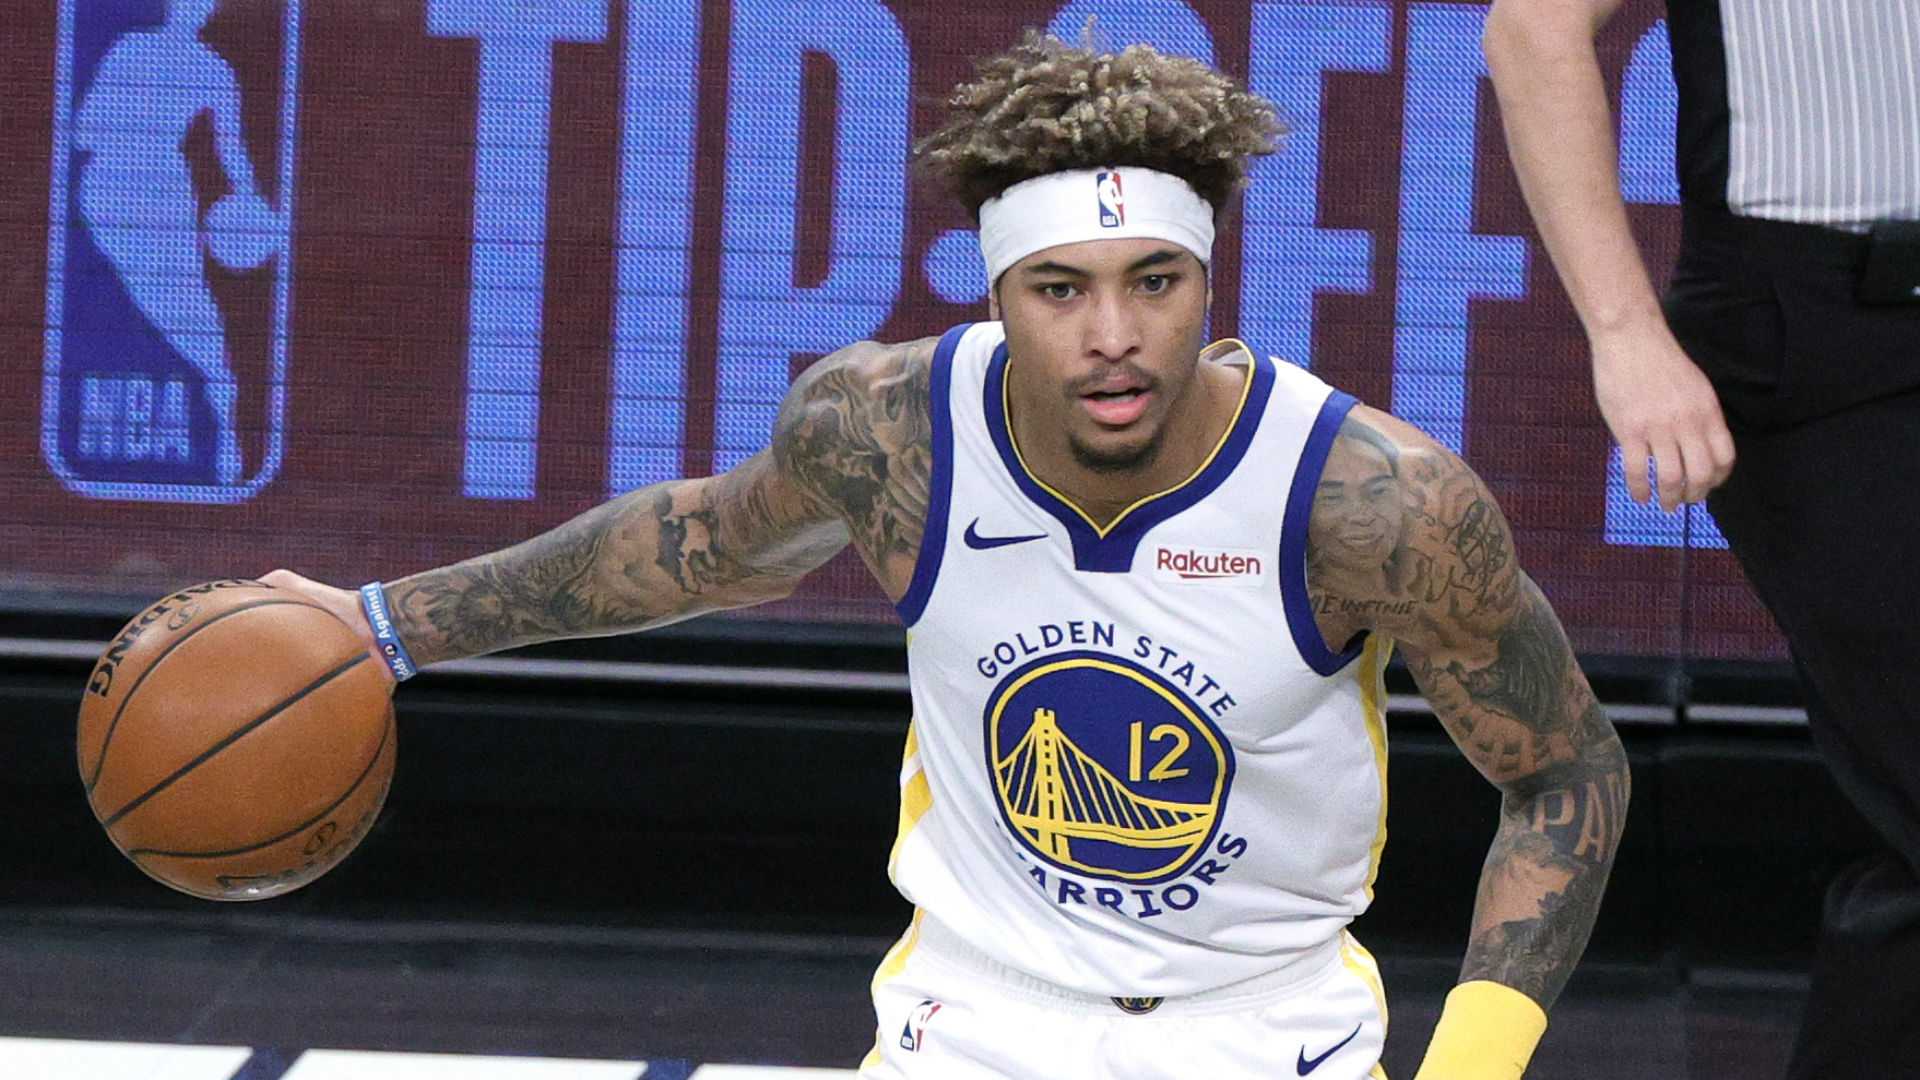  New Warrior Kelly Oubre Jr. Has Forgotten How to Shoot the Ball